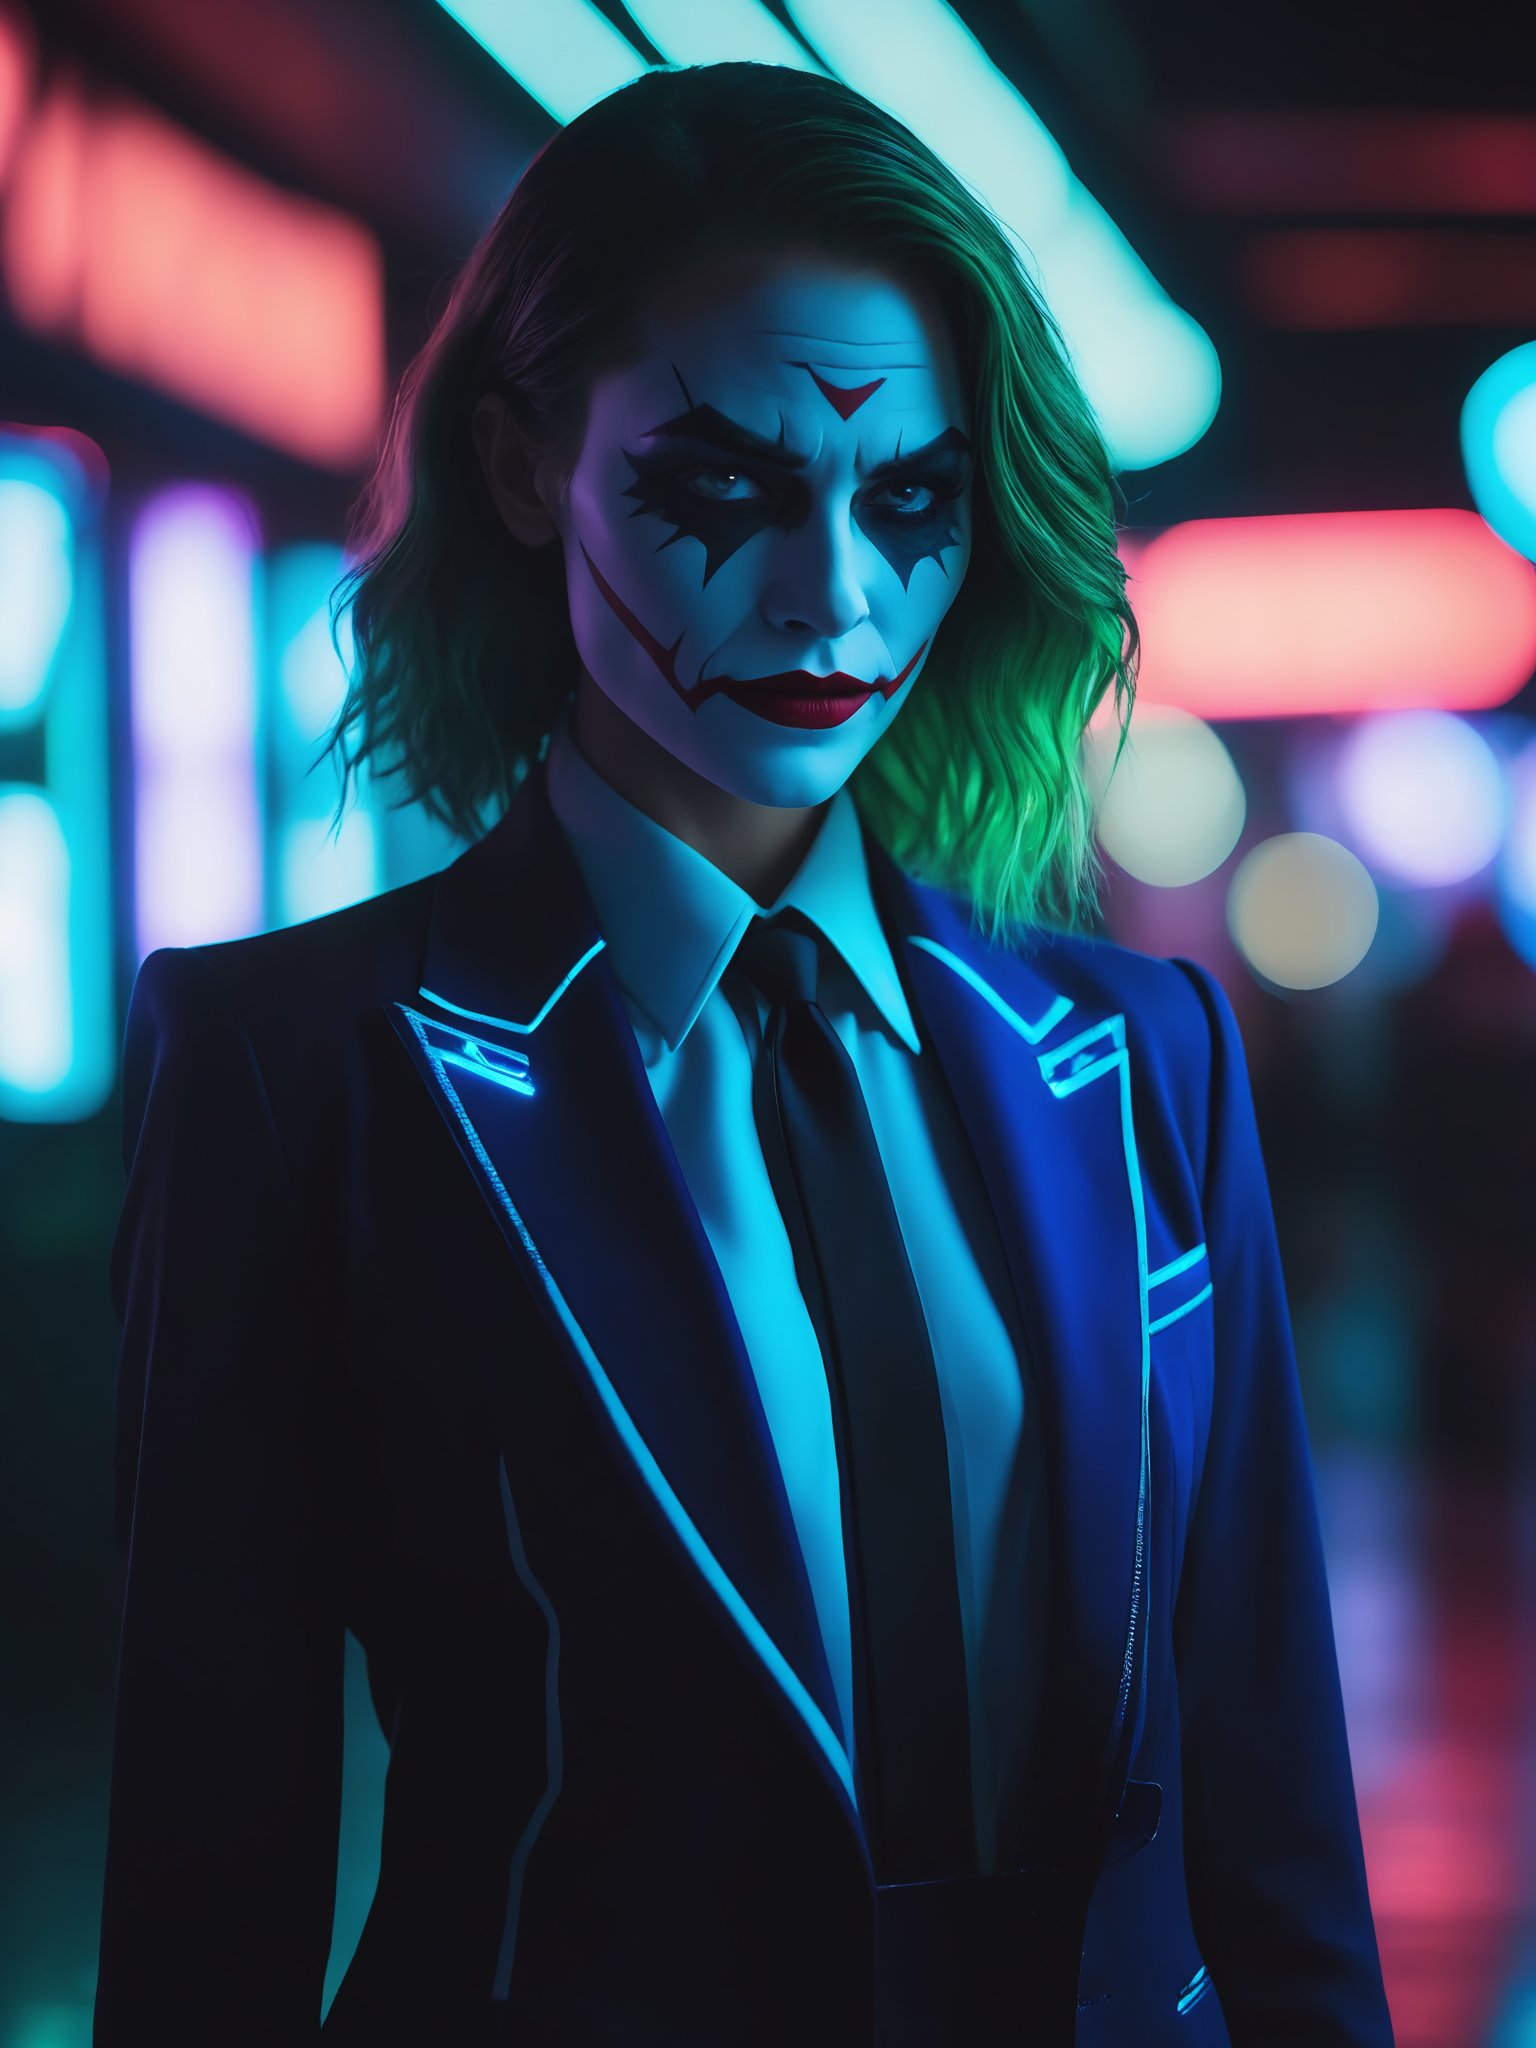 A conceptual Joker lady stands confidently in a dimly lit environment, illuminated by neon lights that cast an eerie glow. Her striking features are captured in sharp focus with the iPhone X's telephoto lens, showcasing detailed skin texture and bright blue eyes that seem to radiate luminosity. She wears a sleek suit, her dark hue attire blending seamlessly with the surrounding shadows.